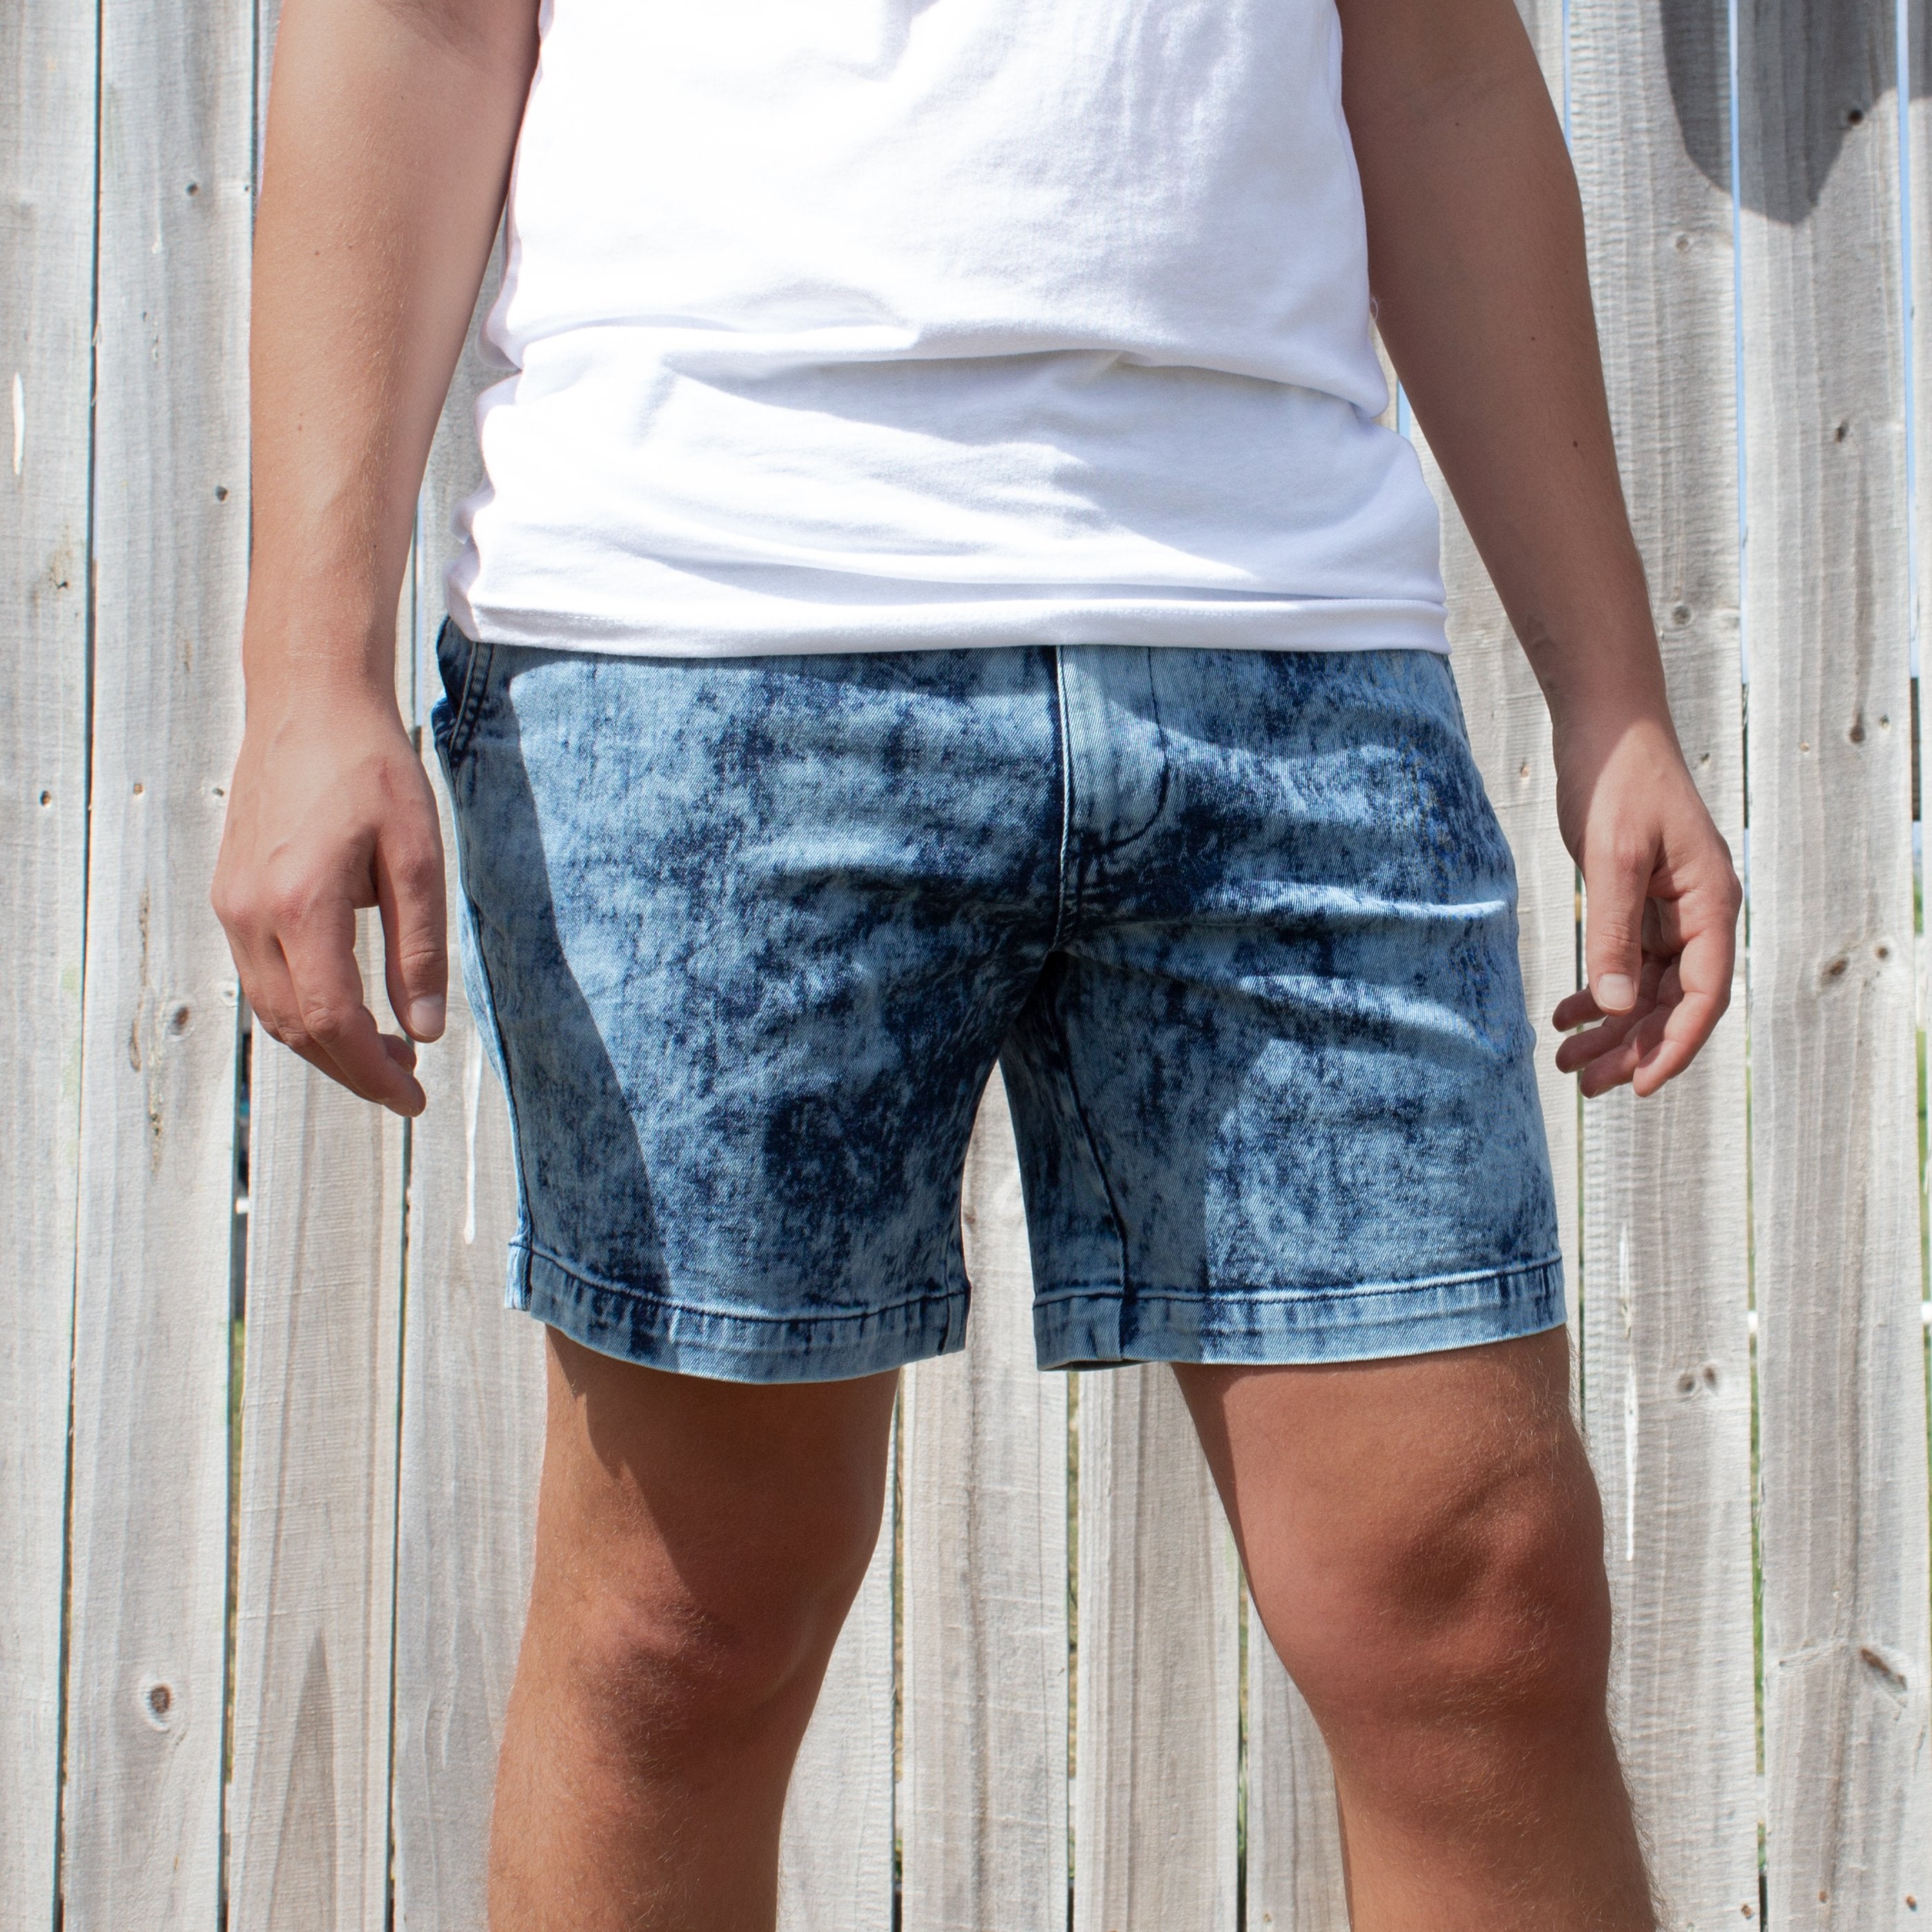 Is it okay for a guy to wear short shorts? - Quora